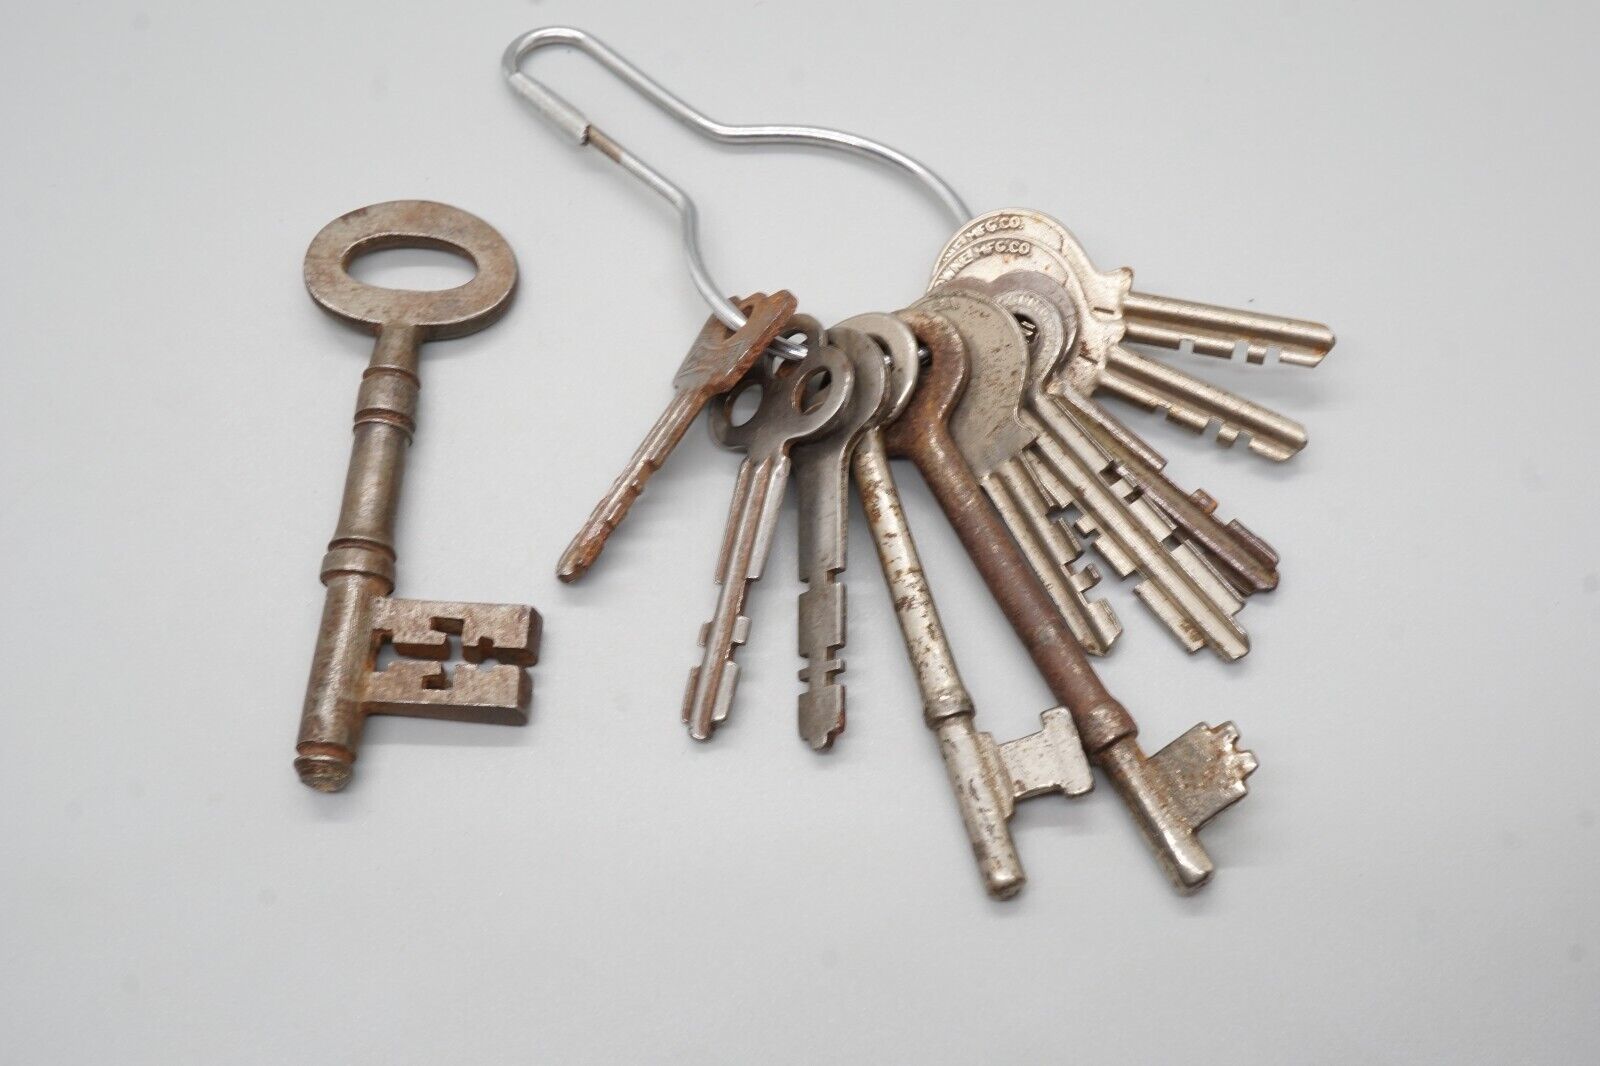 Vintage 1910s - 1920s Very Unique Skeleton Key With 10 Extra Keys Lot Of 11